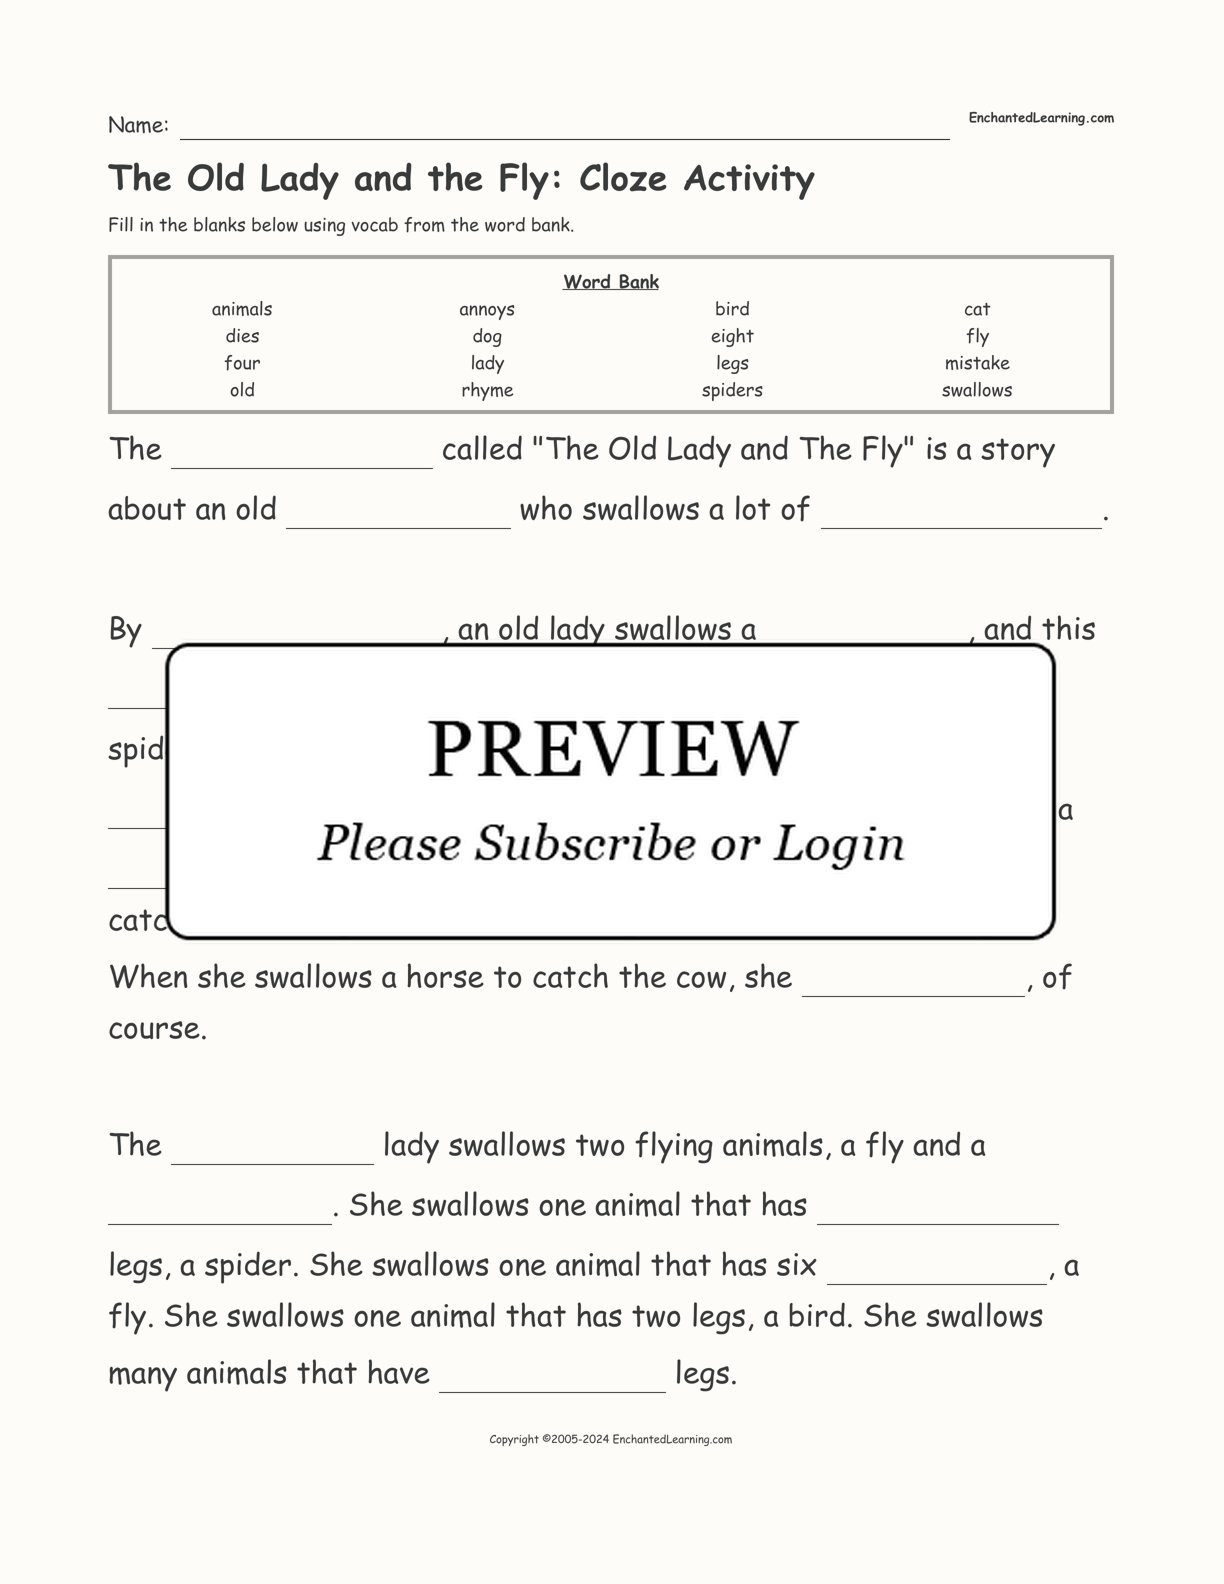 The Old Lady and the Fly: Cloze Activity interactive worksheet page 1